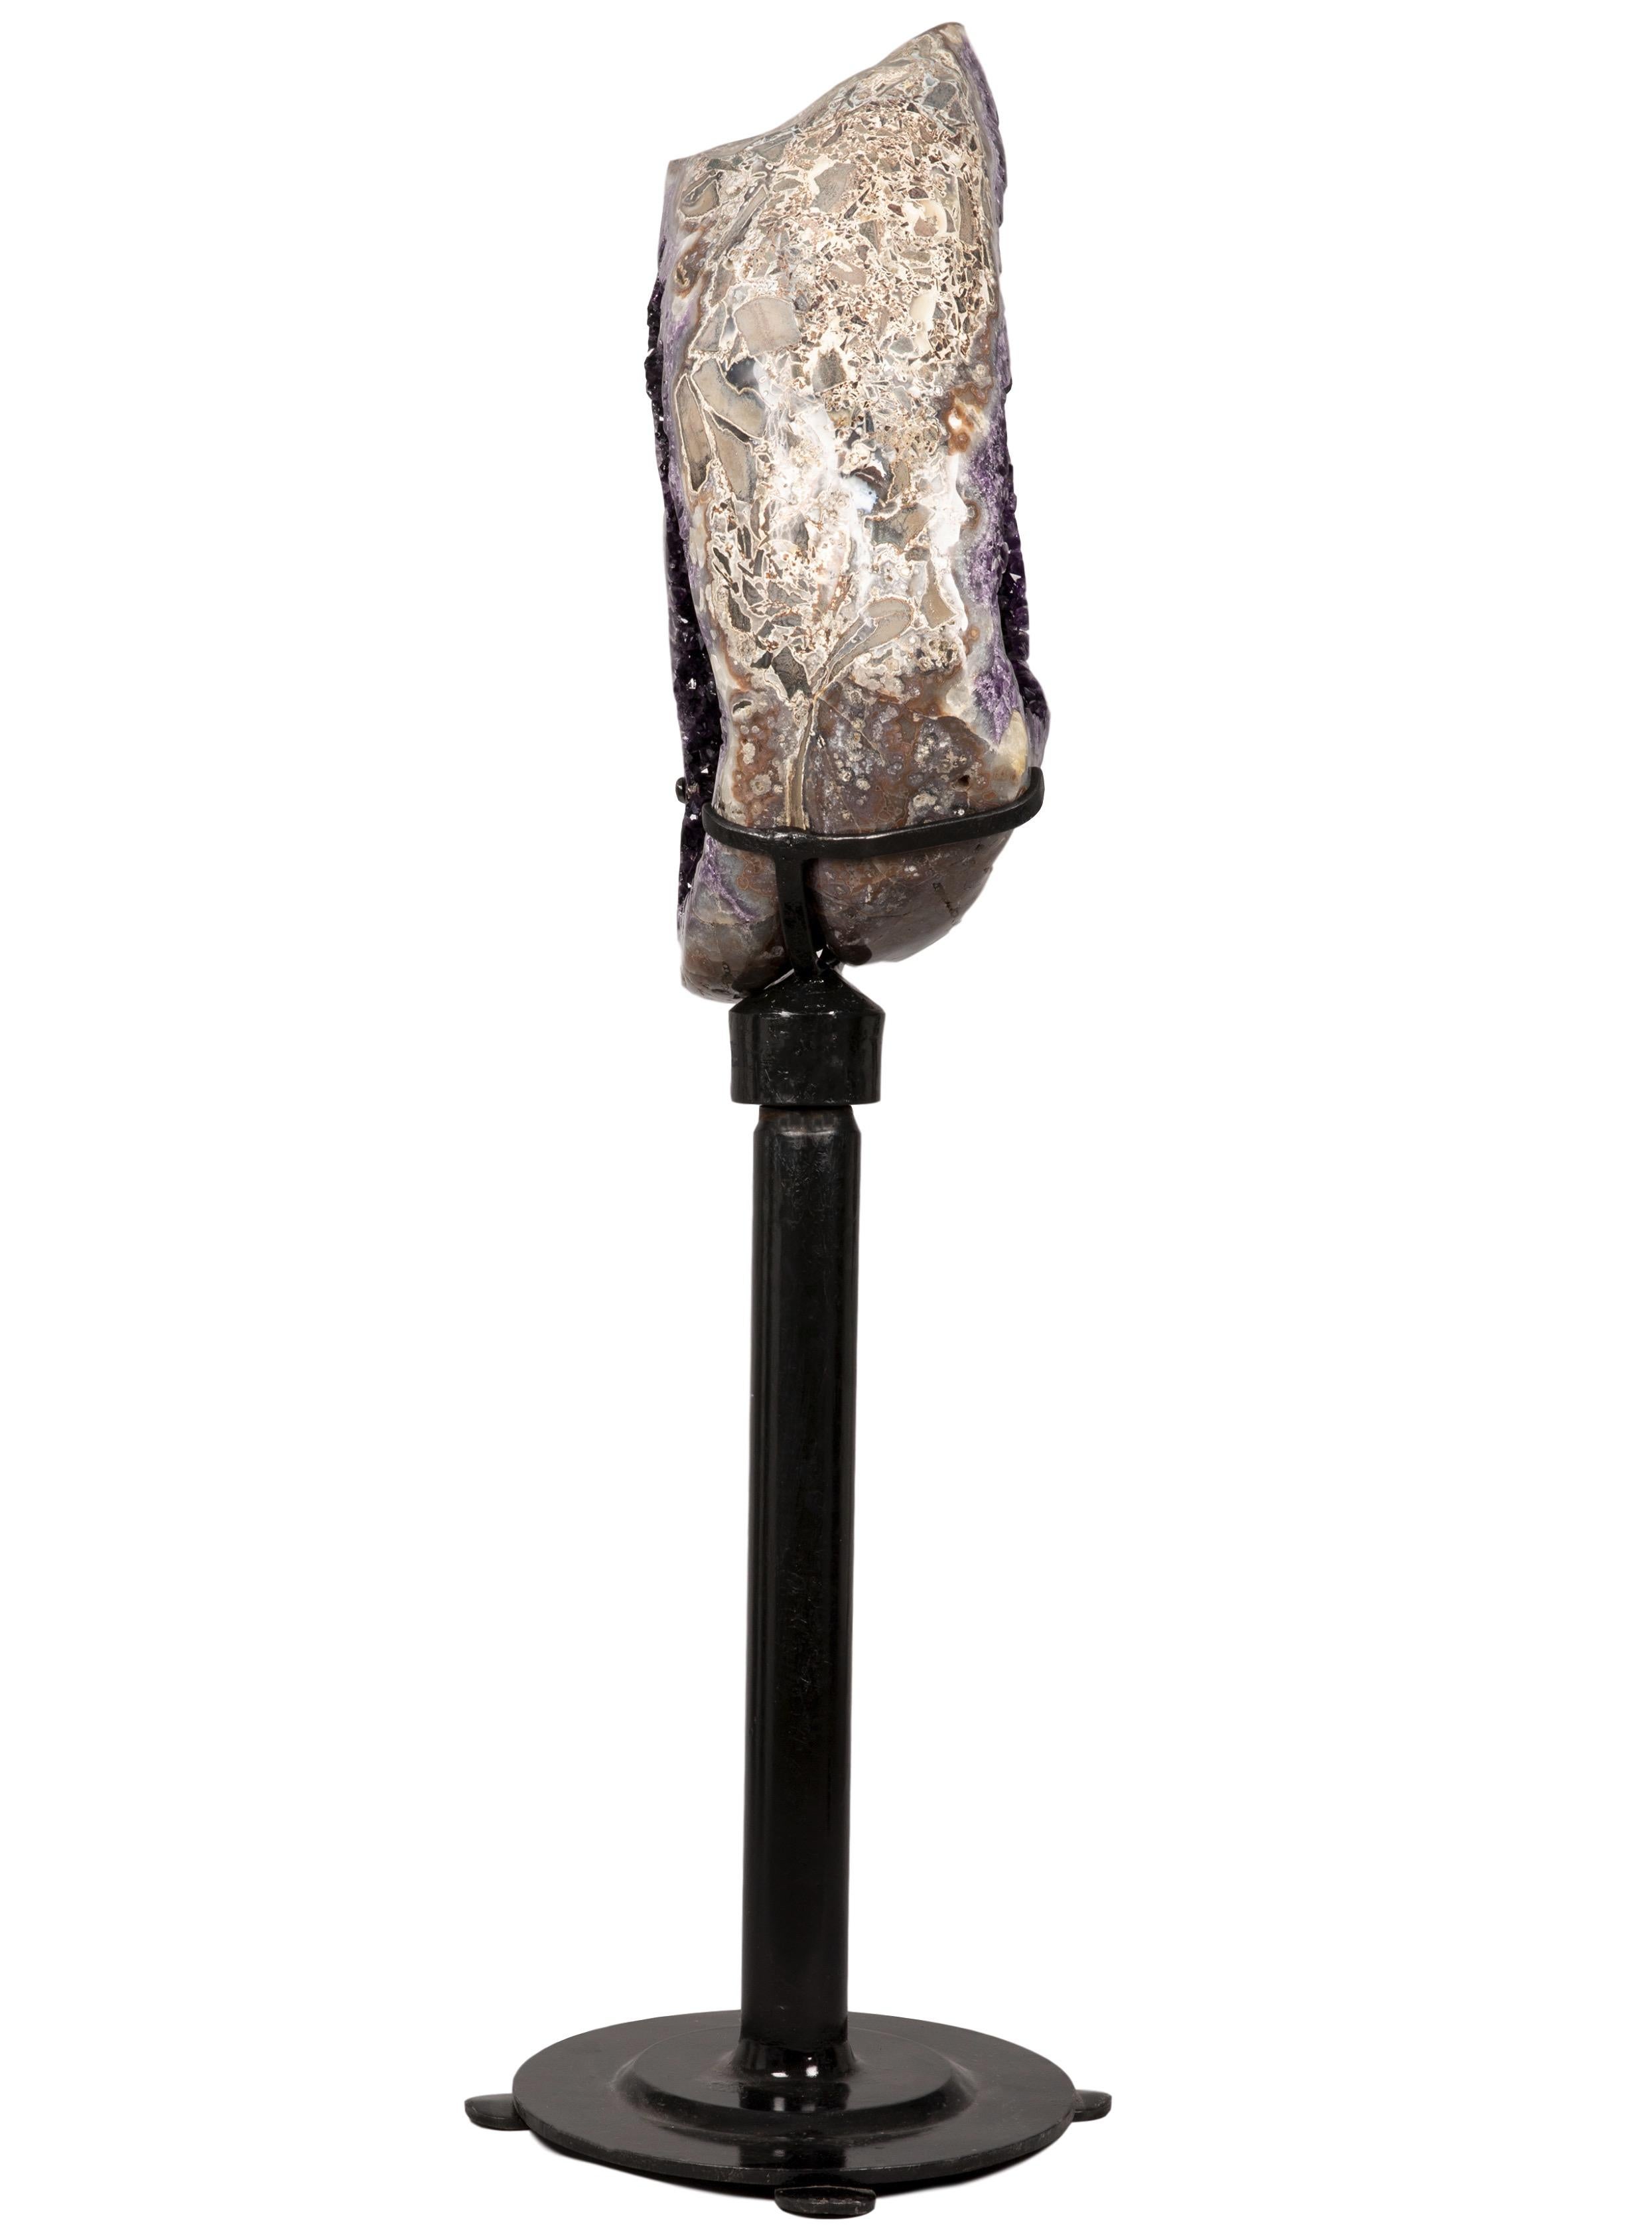 Stunning large geode slice on a custom metal rotating stand.

From its polished agate shell on the outside, to the rich purple amethyst crystals inside, this piece presents an exquisite combination of minerals on a sculptural journey. 

The